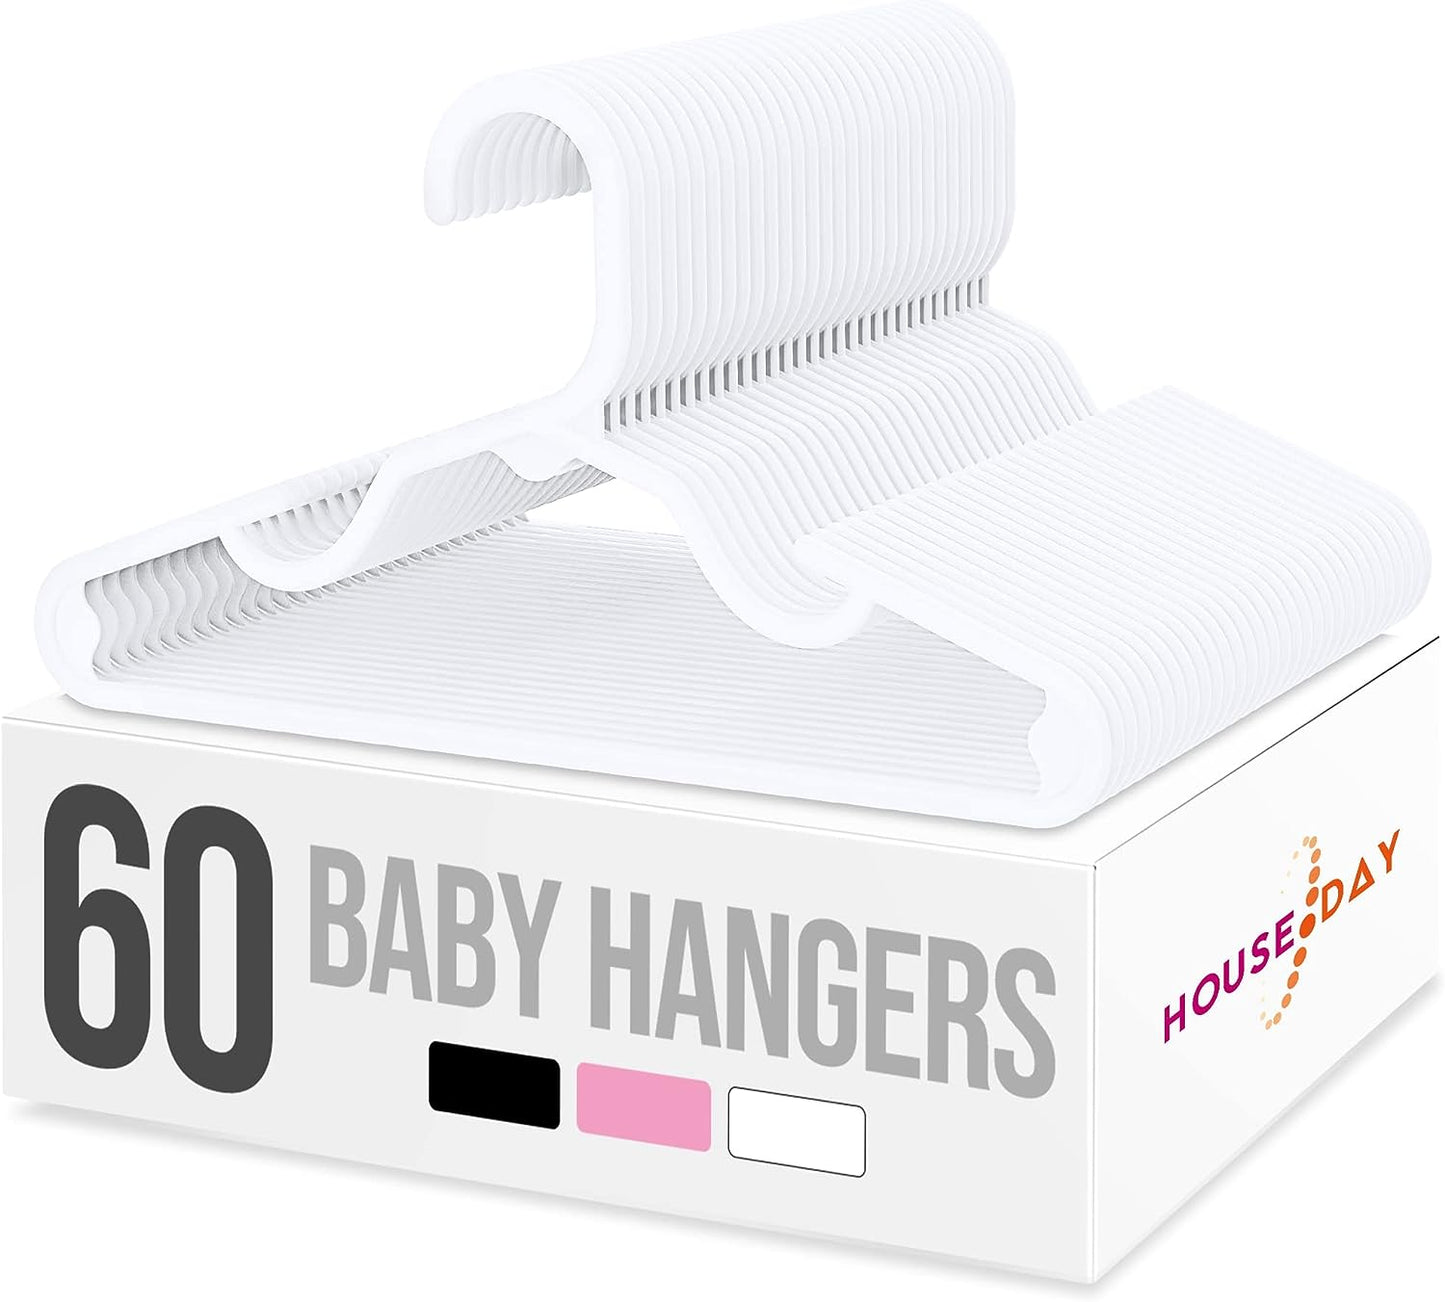 HOUSE DAY 11.7x6.5 Inch Plastic Baby Hangers for Closet White 60 Pack